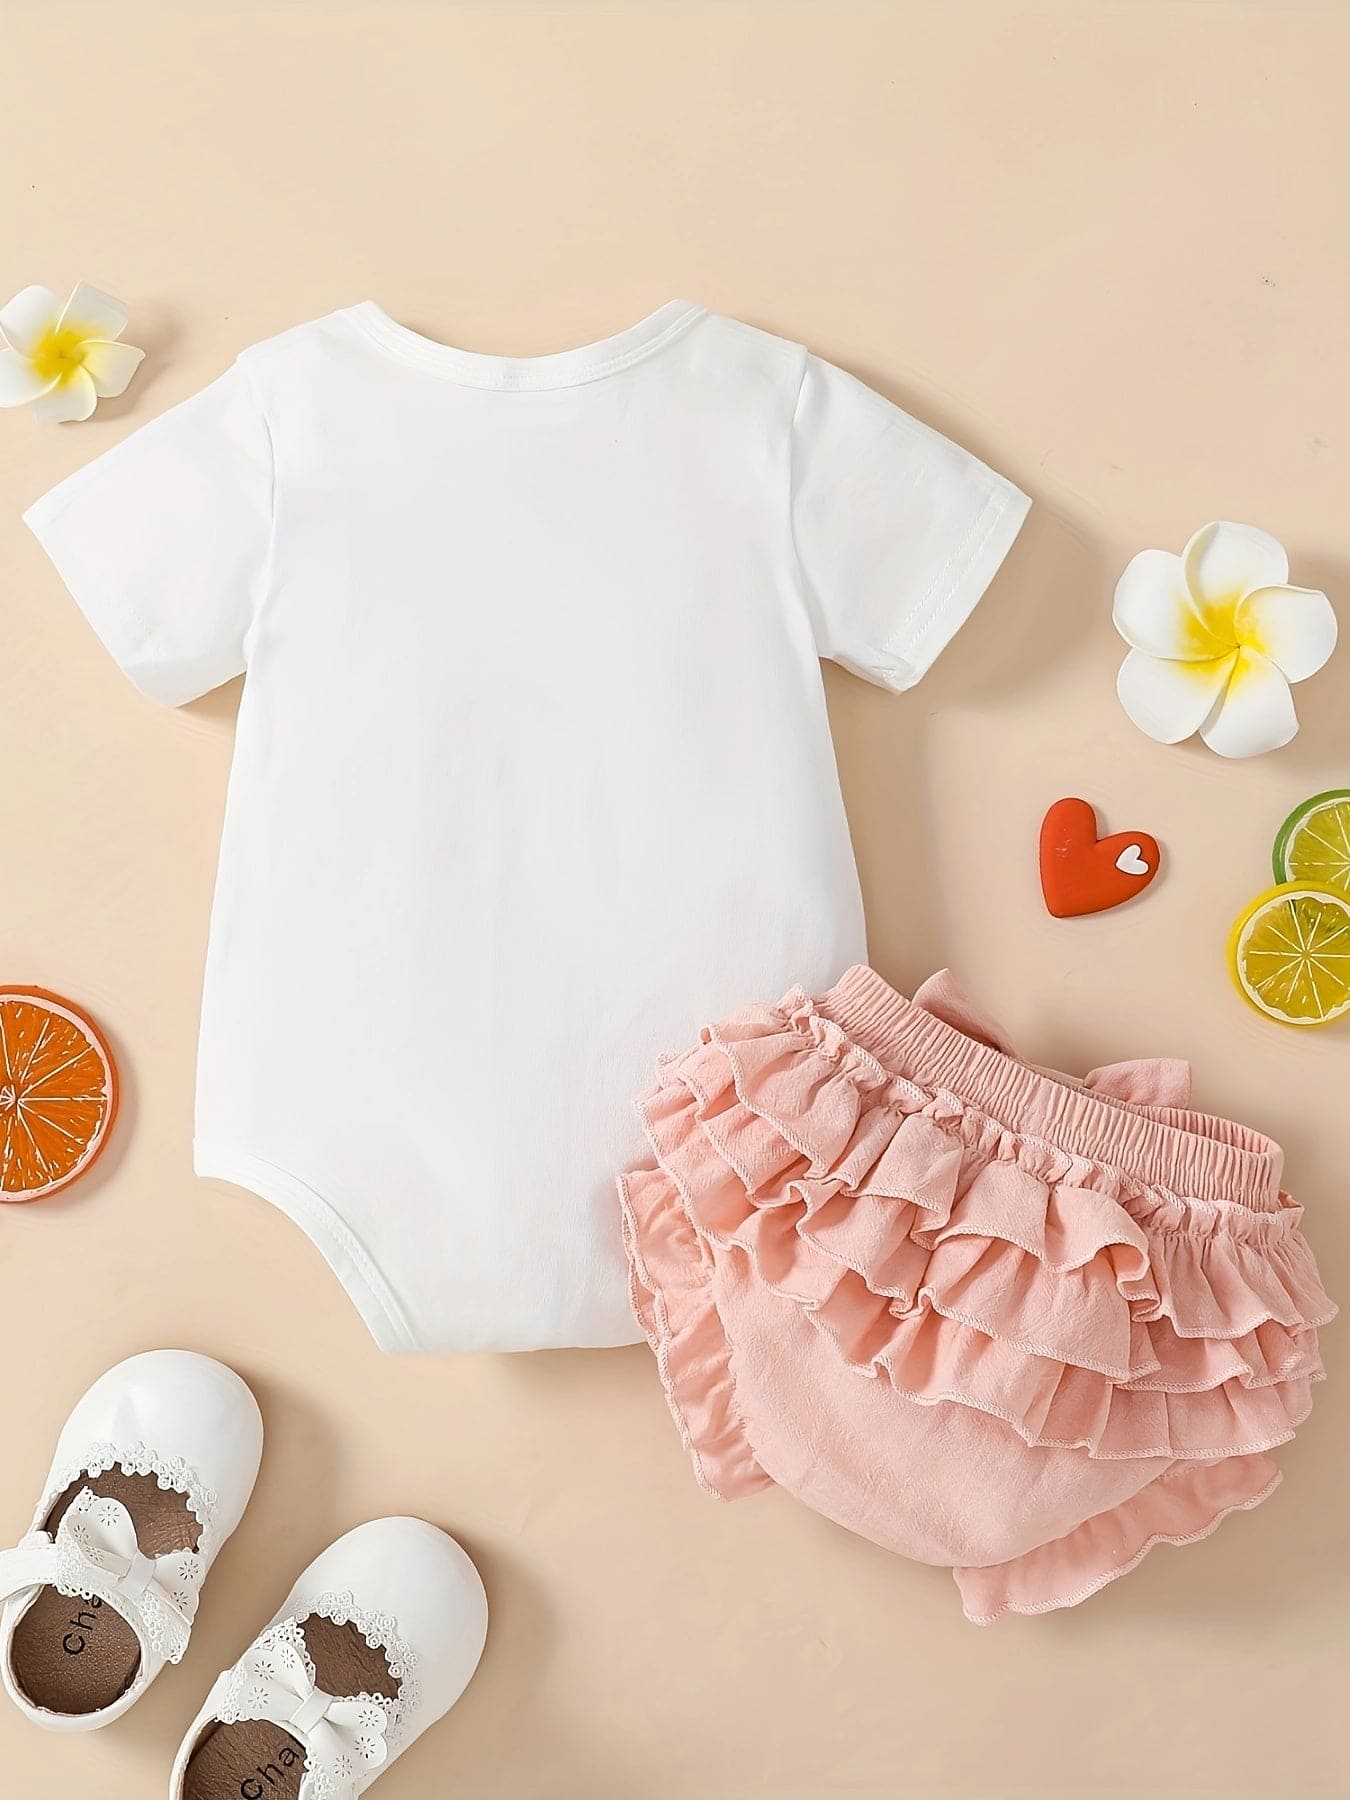 Baby Clothes Girl Newborn Baby Girl Outfits Short Sets, Short Sleeve Ribbed Romper Floral Shorts Clothes Baby Girl Summer Outfits